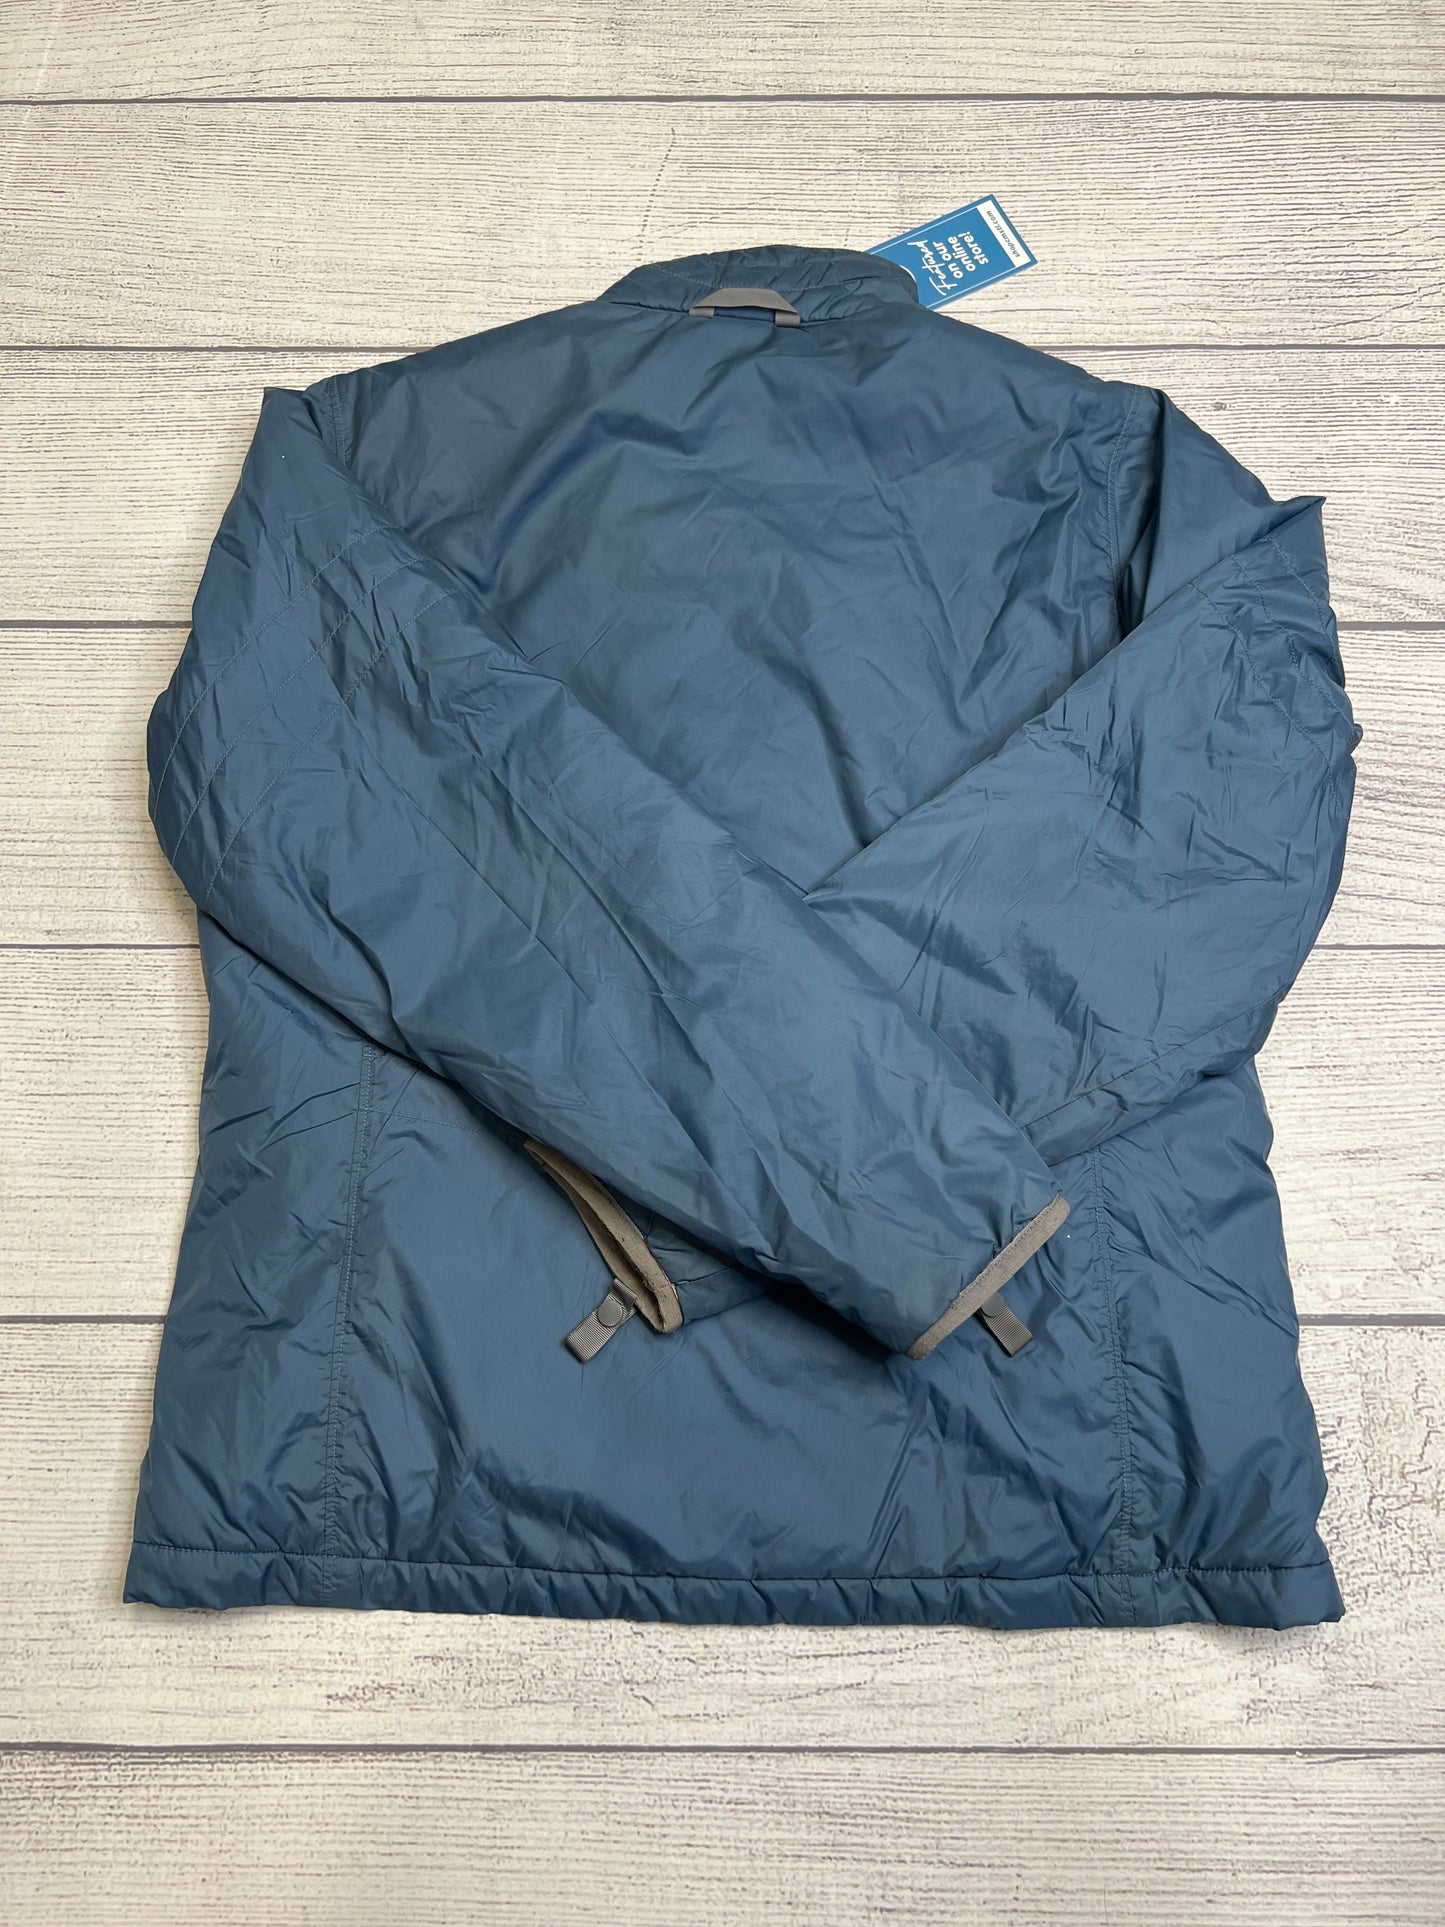 Coat Puffer & Quilted By North Face  Size: M